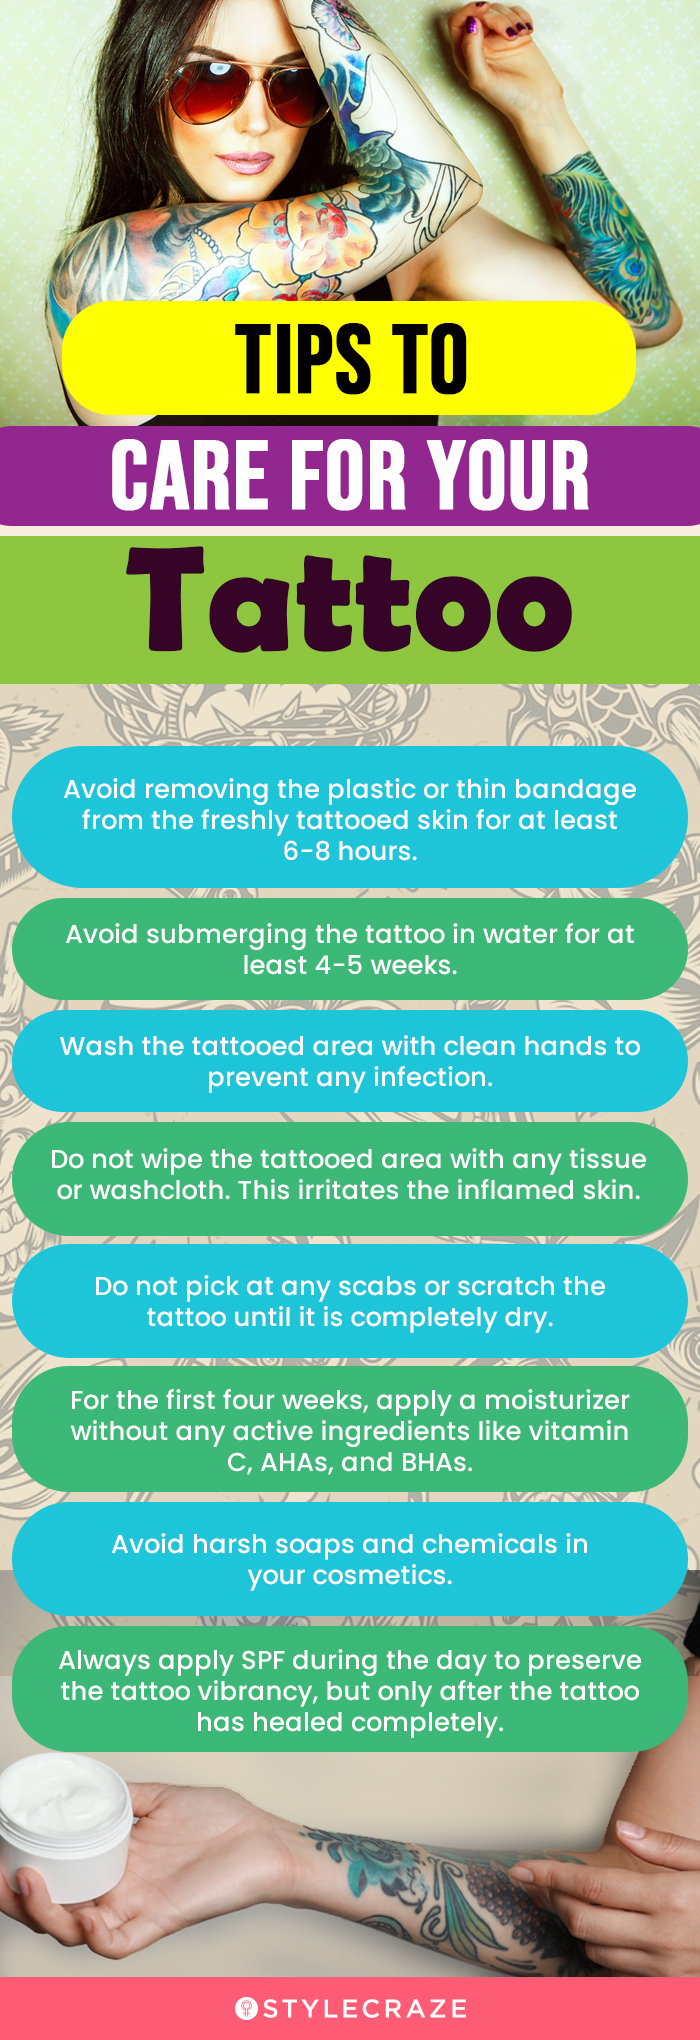 Tips To Care For Your Tattoo (infographic)